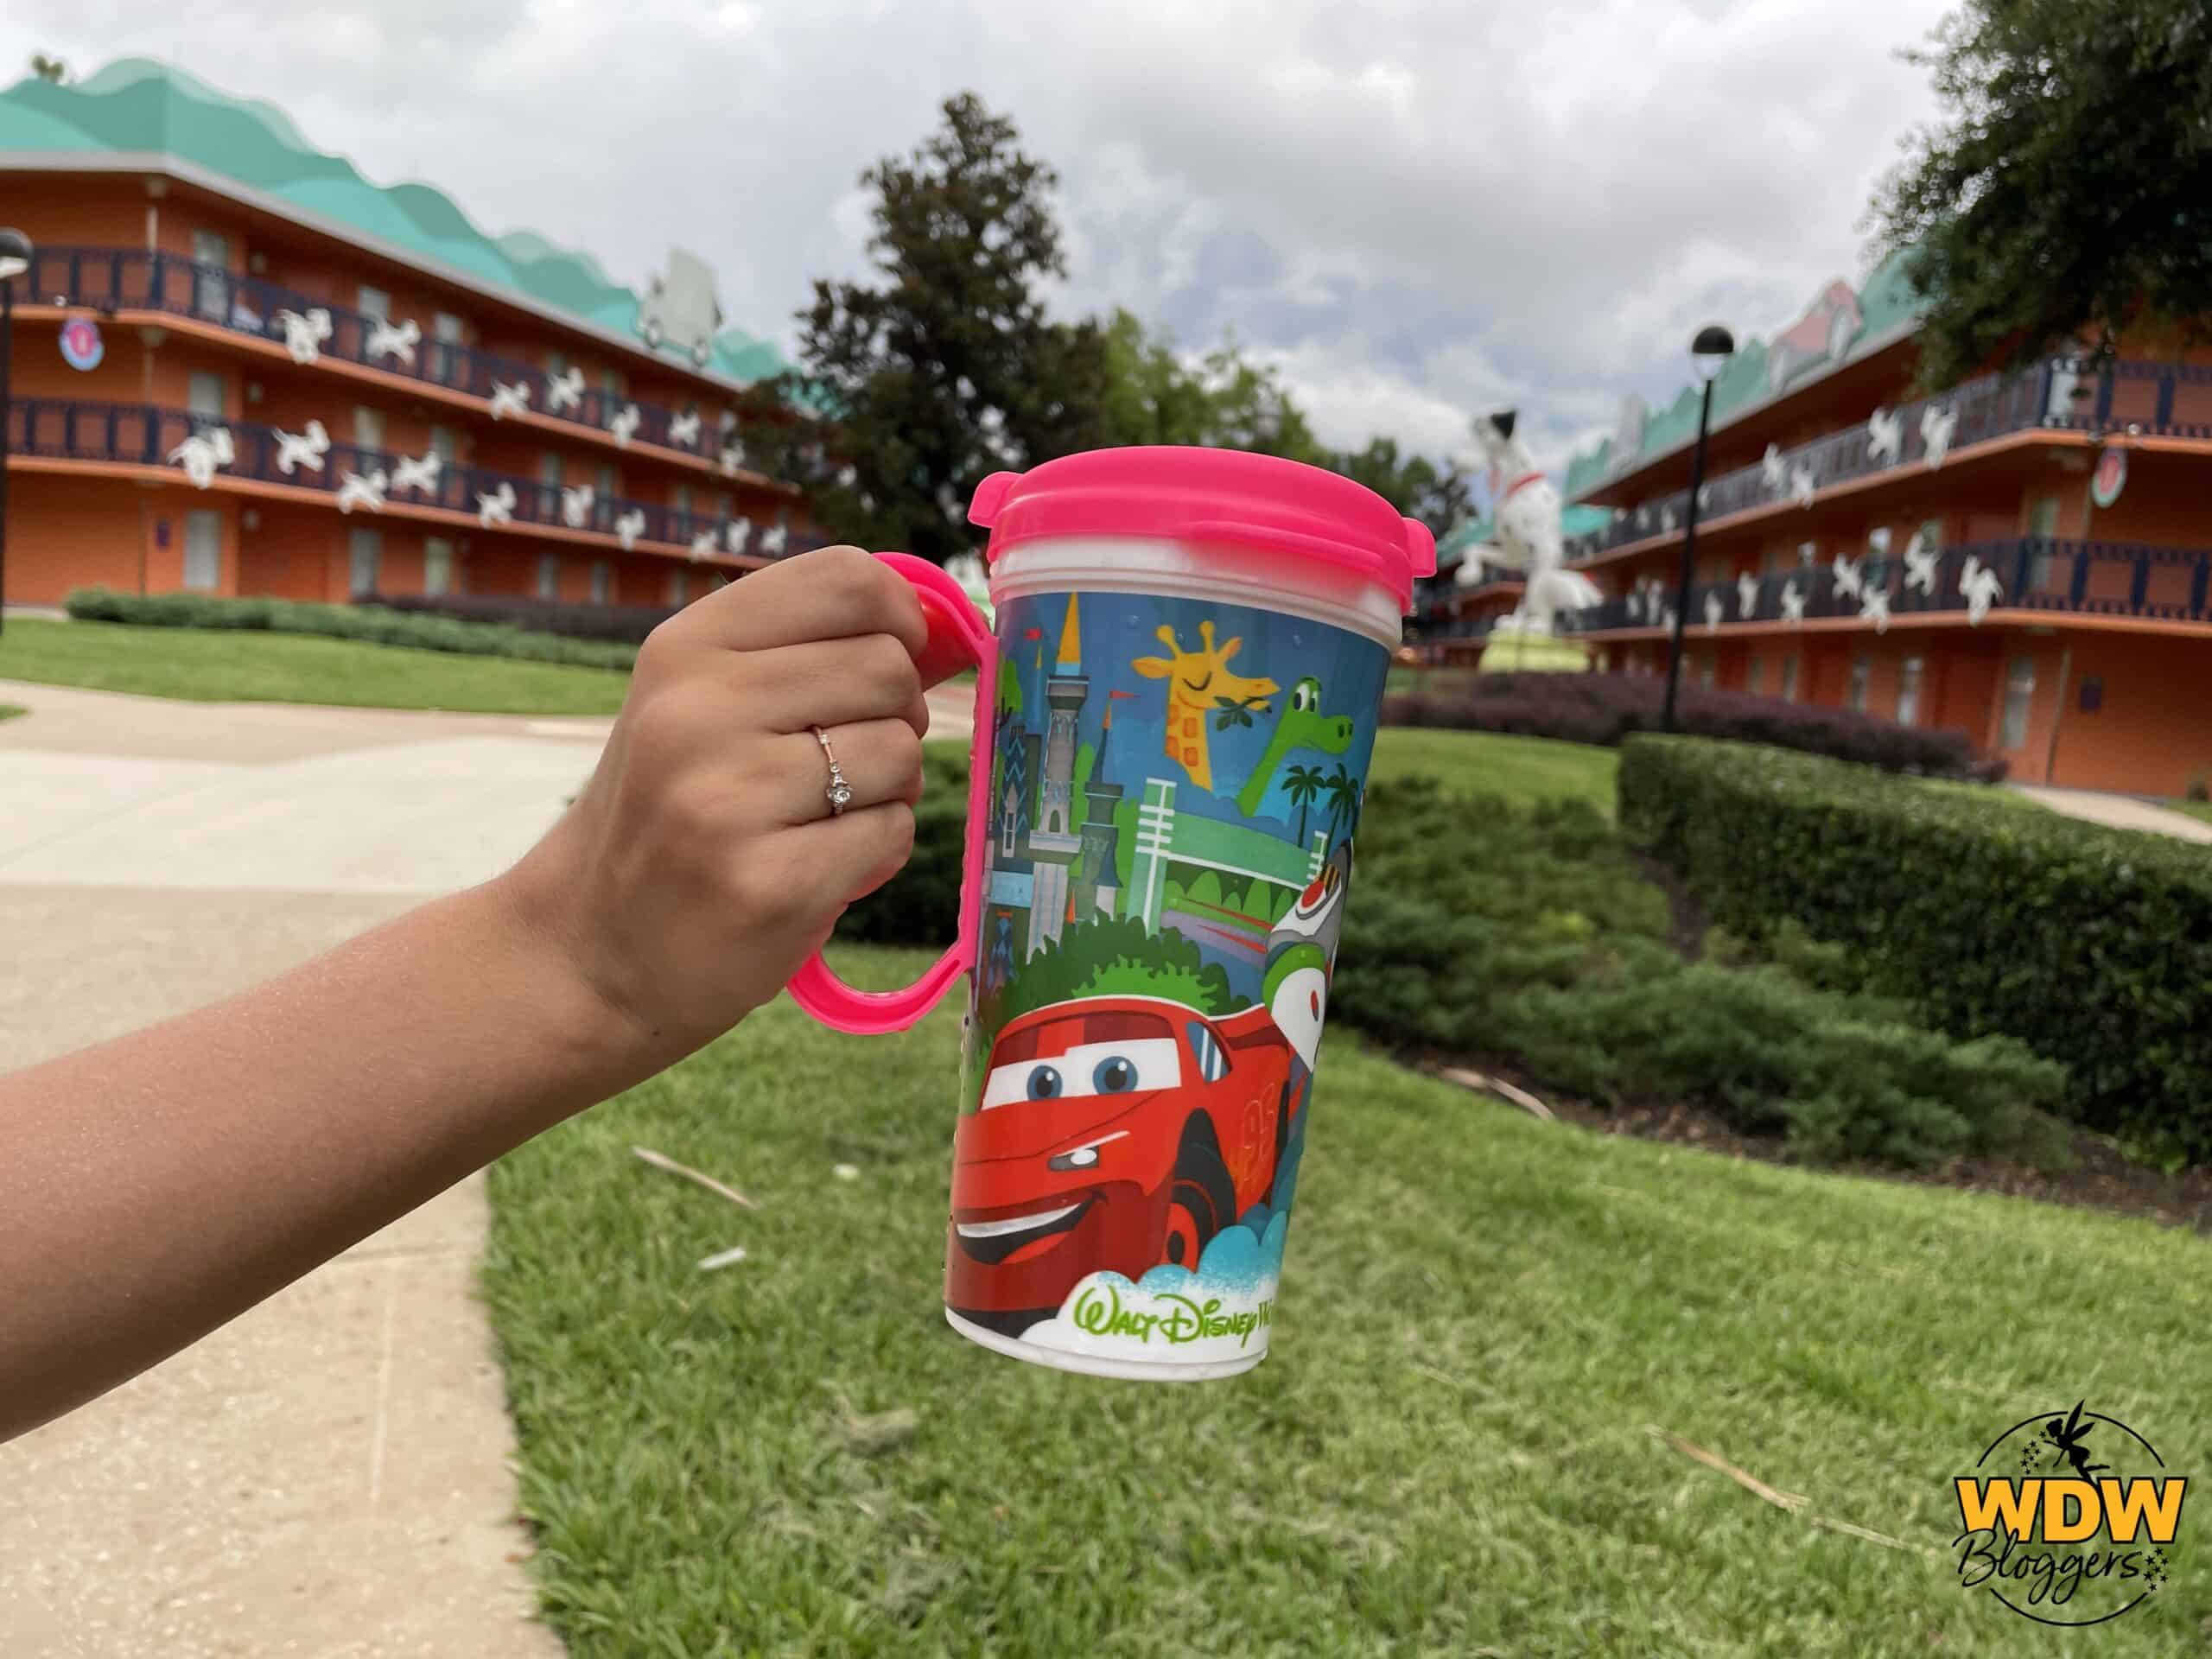 Refillable Holiday Mugs Are BACK in Disney World!